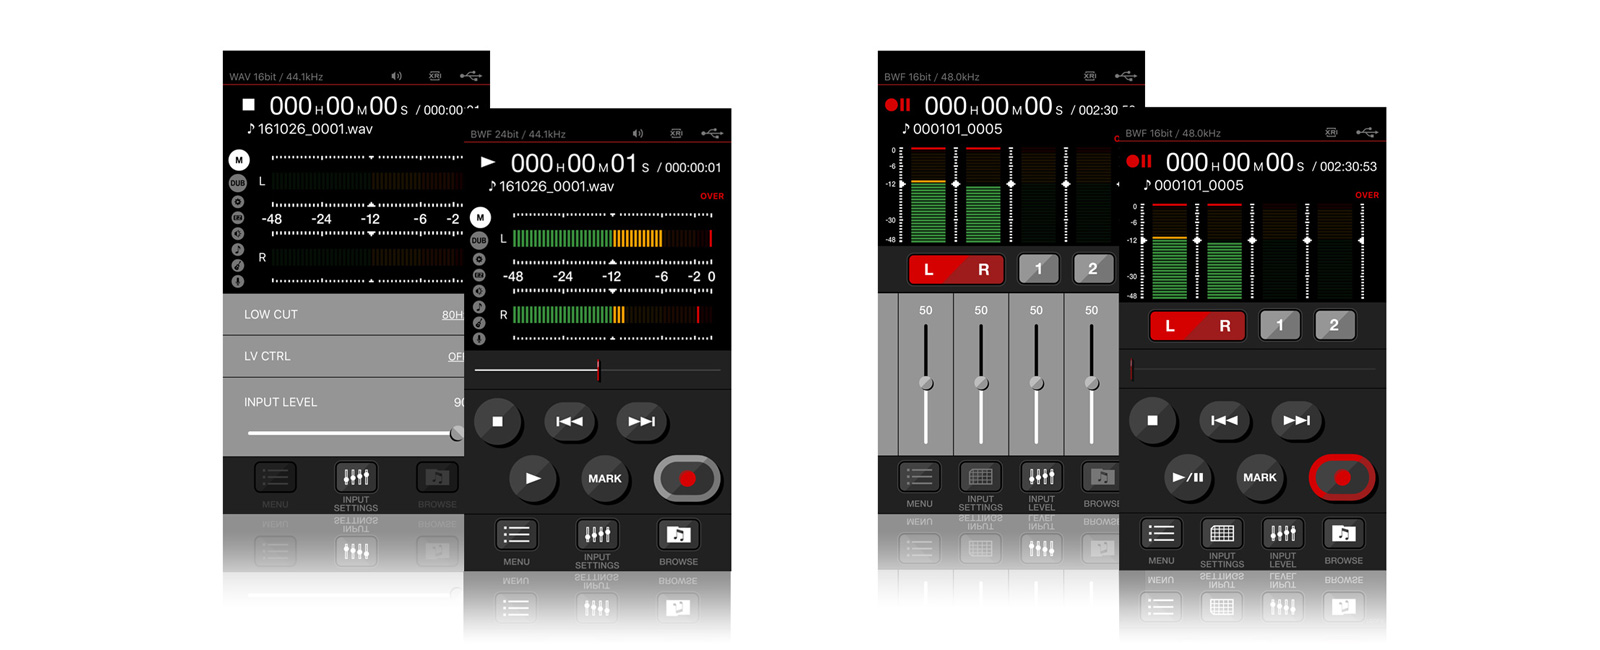 『TASCAM DR CONTROL for Android』V2.2.0の配信終了のお知らせ